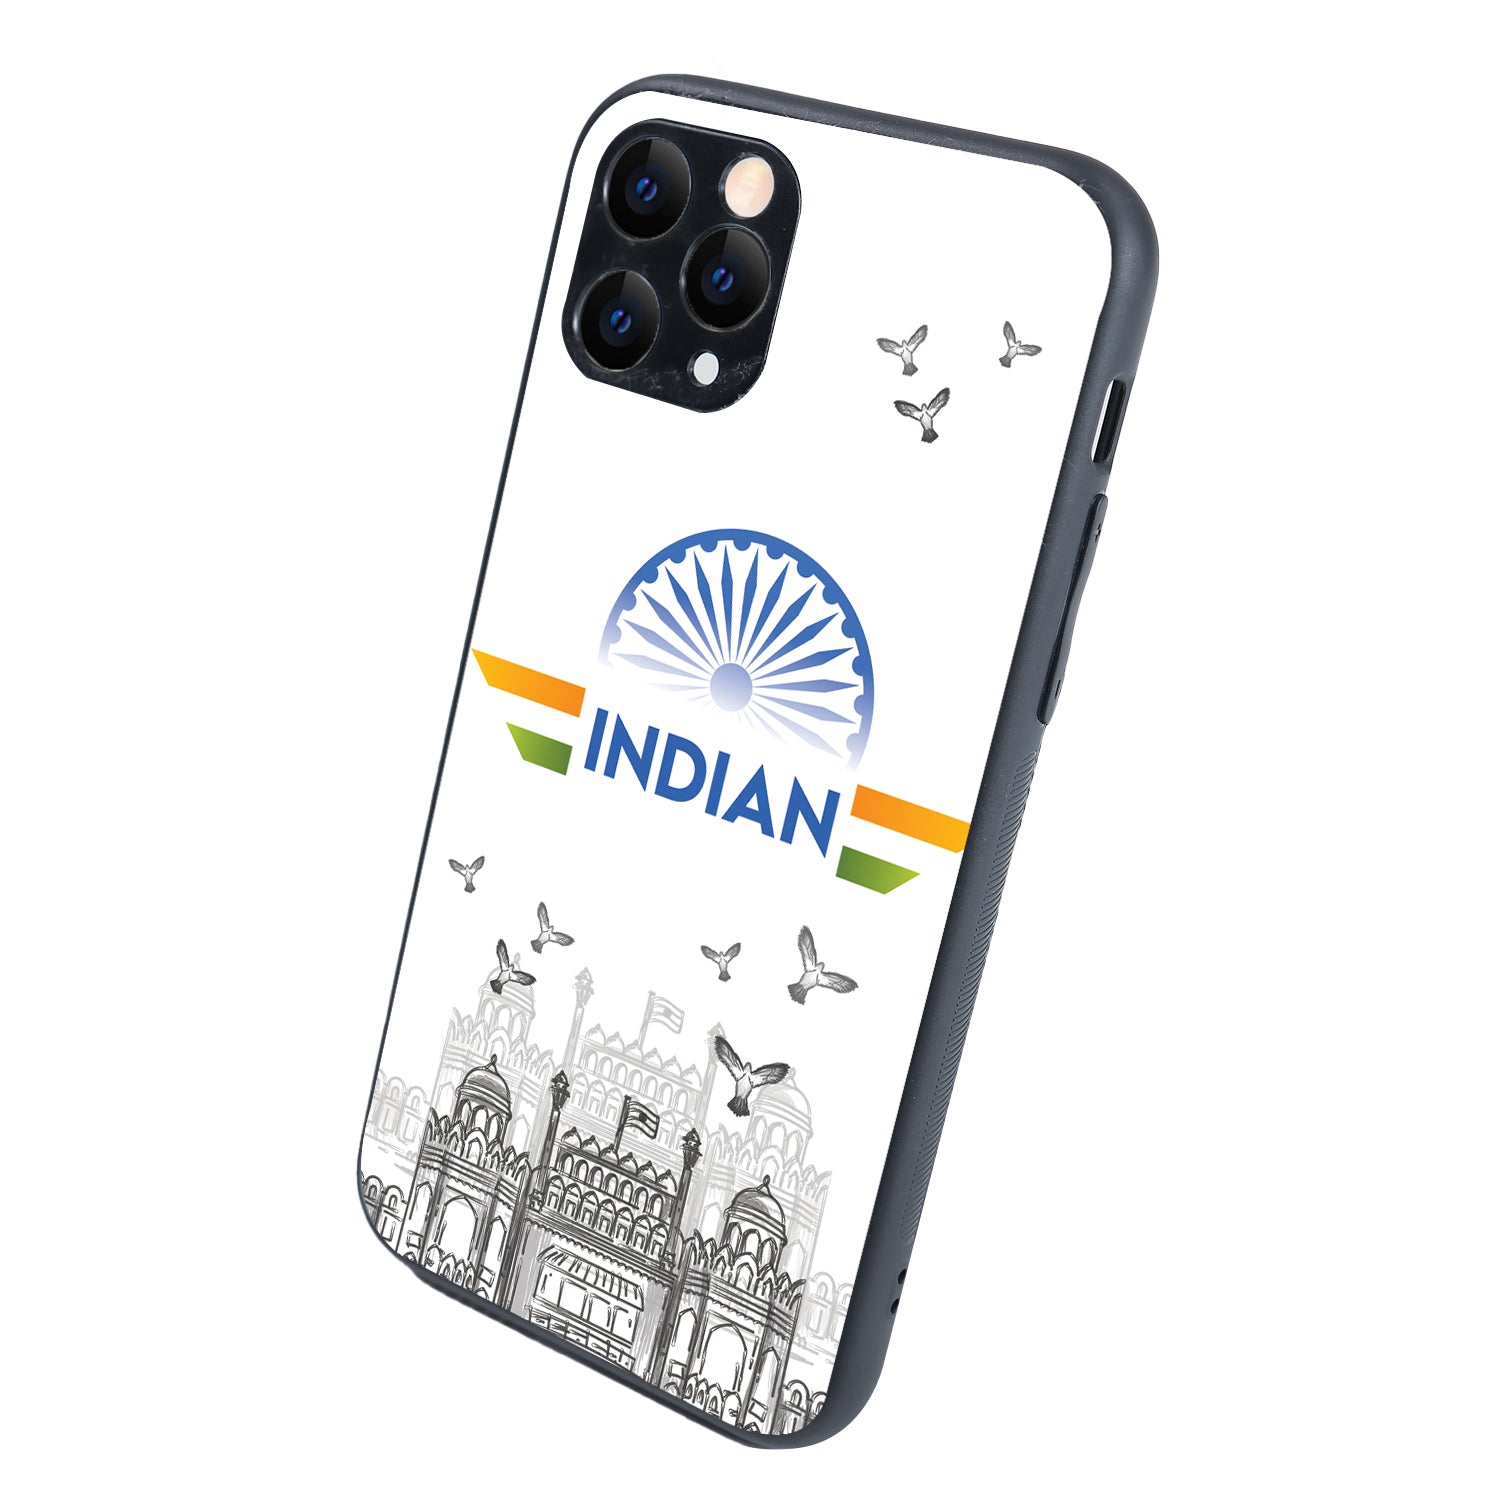 Indian iPhone 11 Pro Case